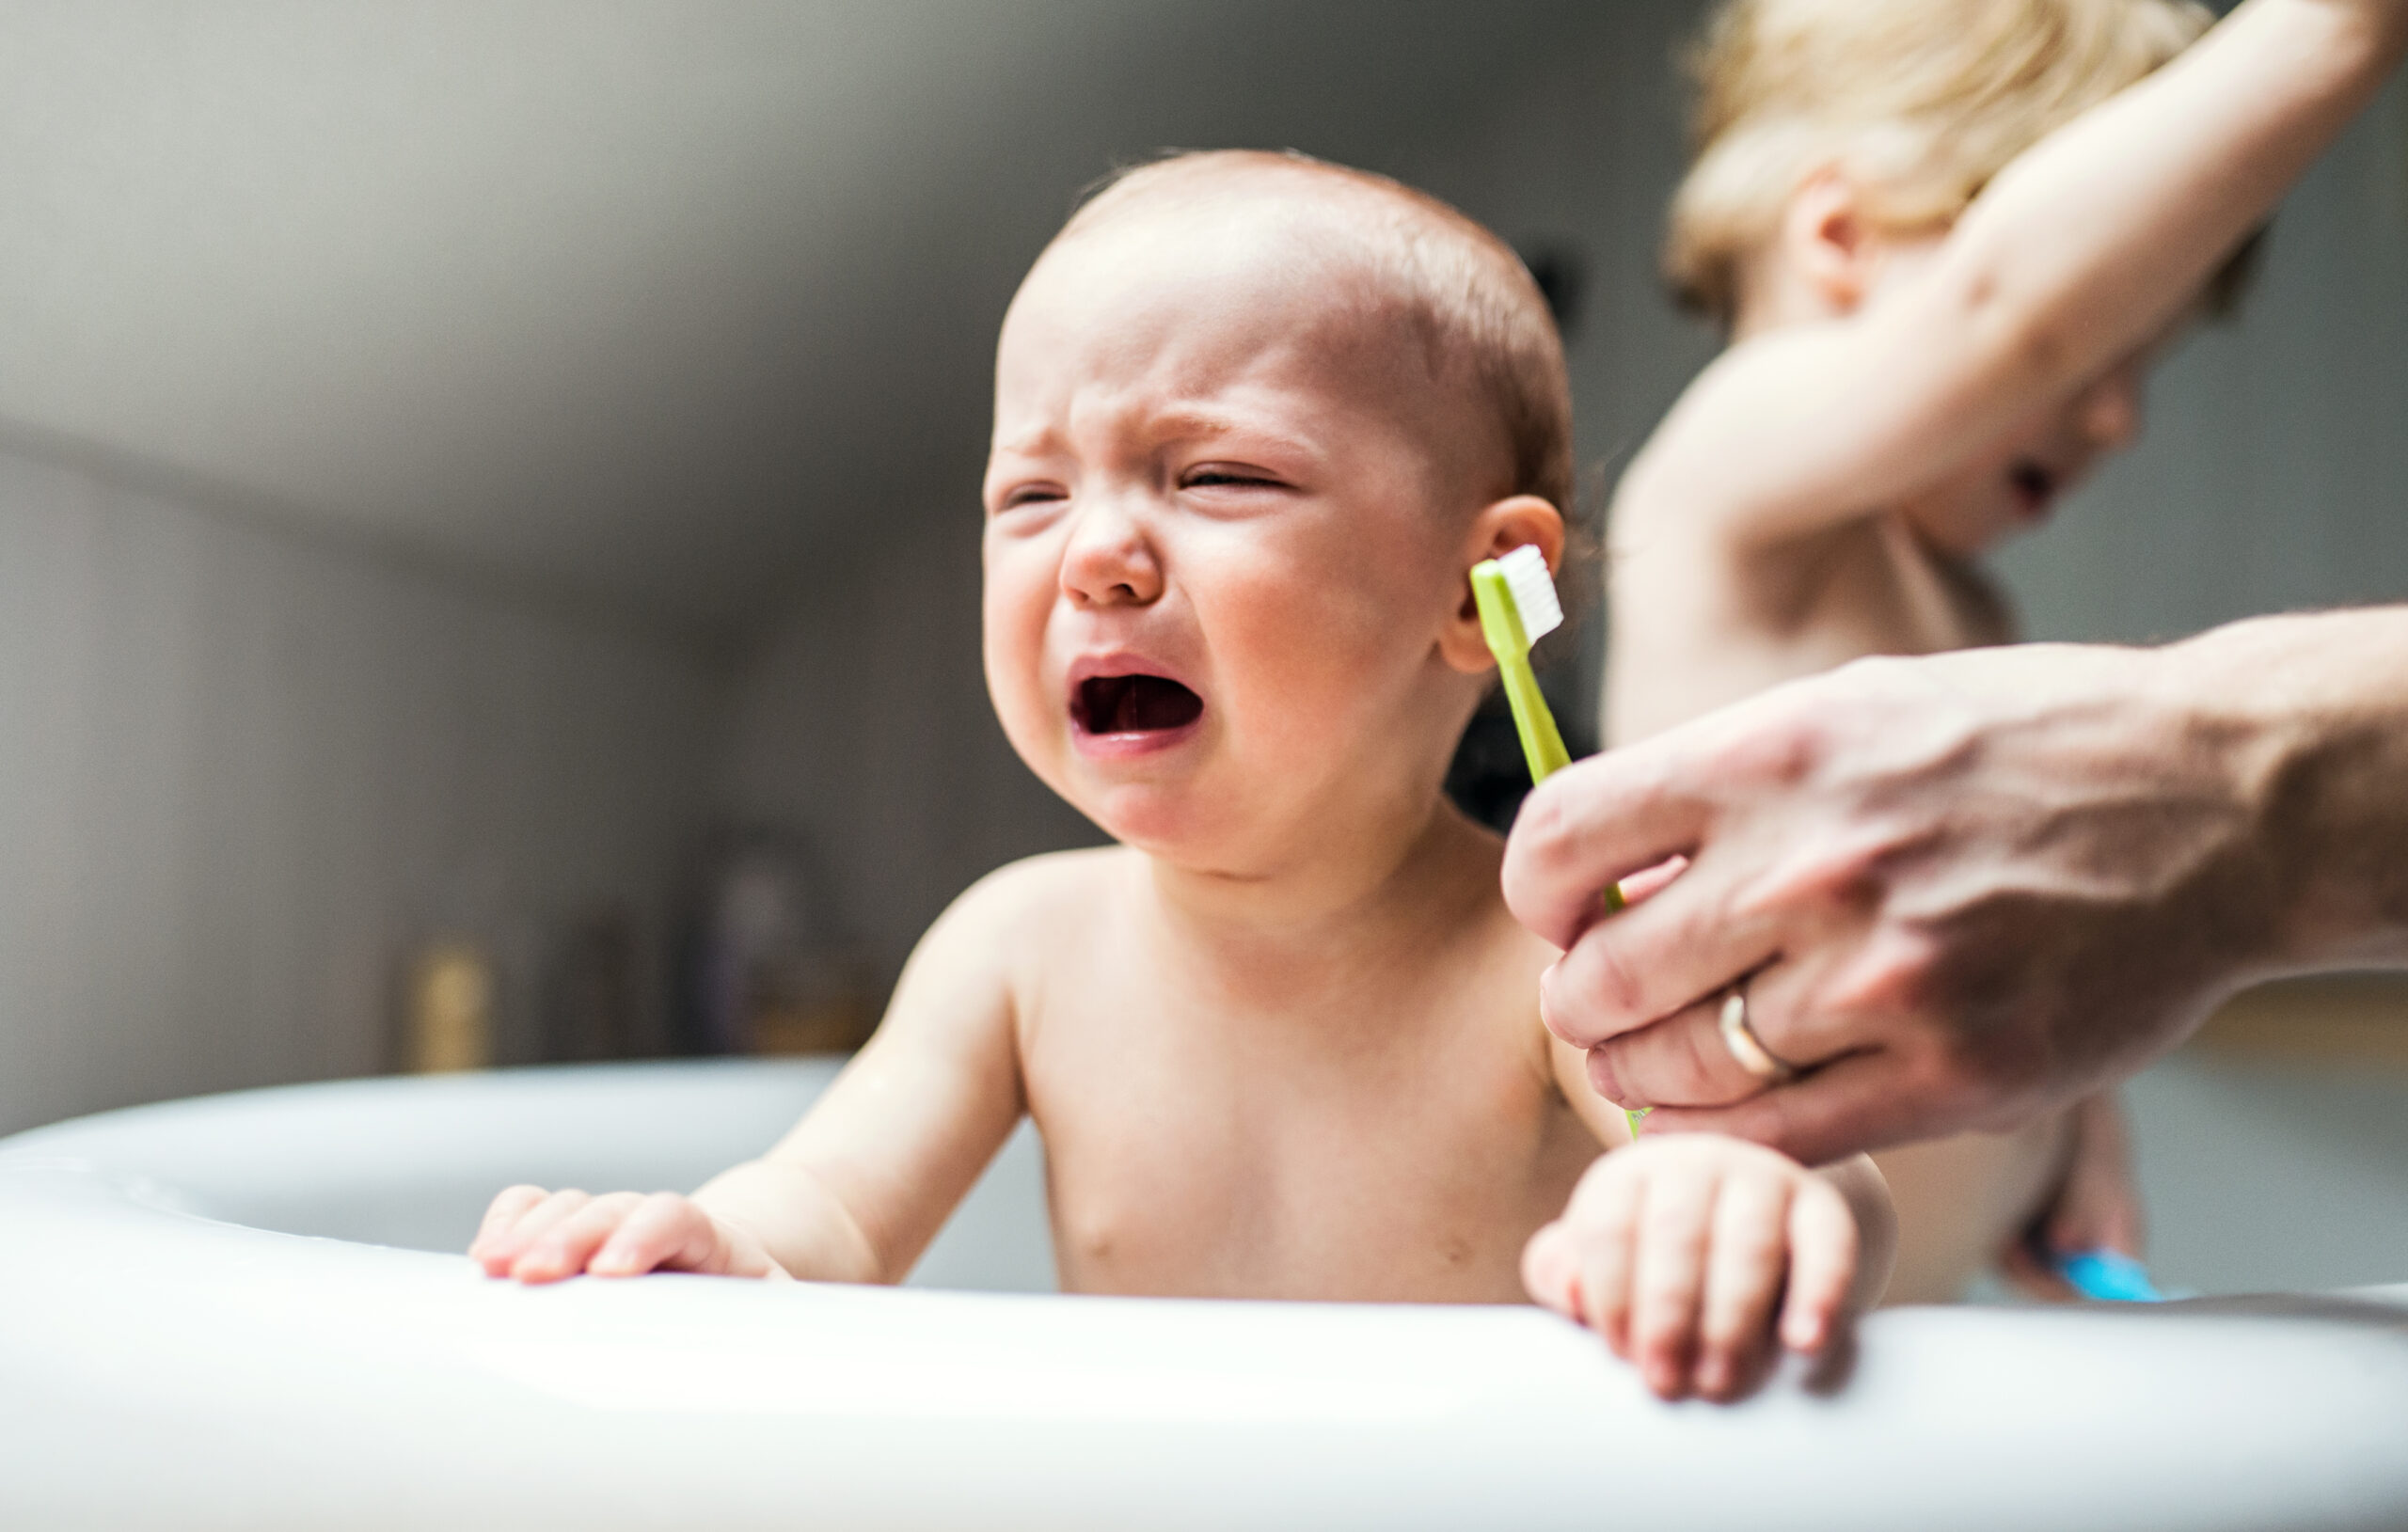 TOOTH DECAY TREATMENT IN INFANTS